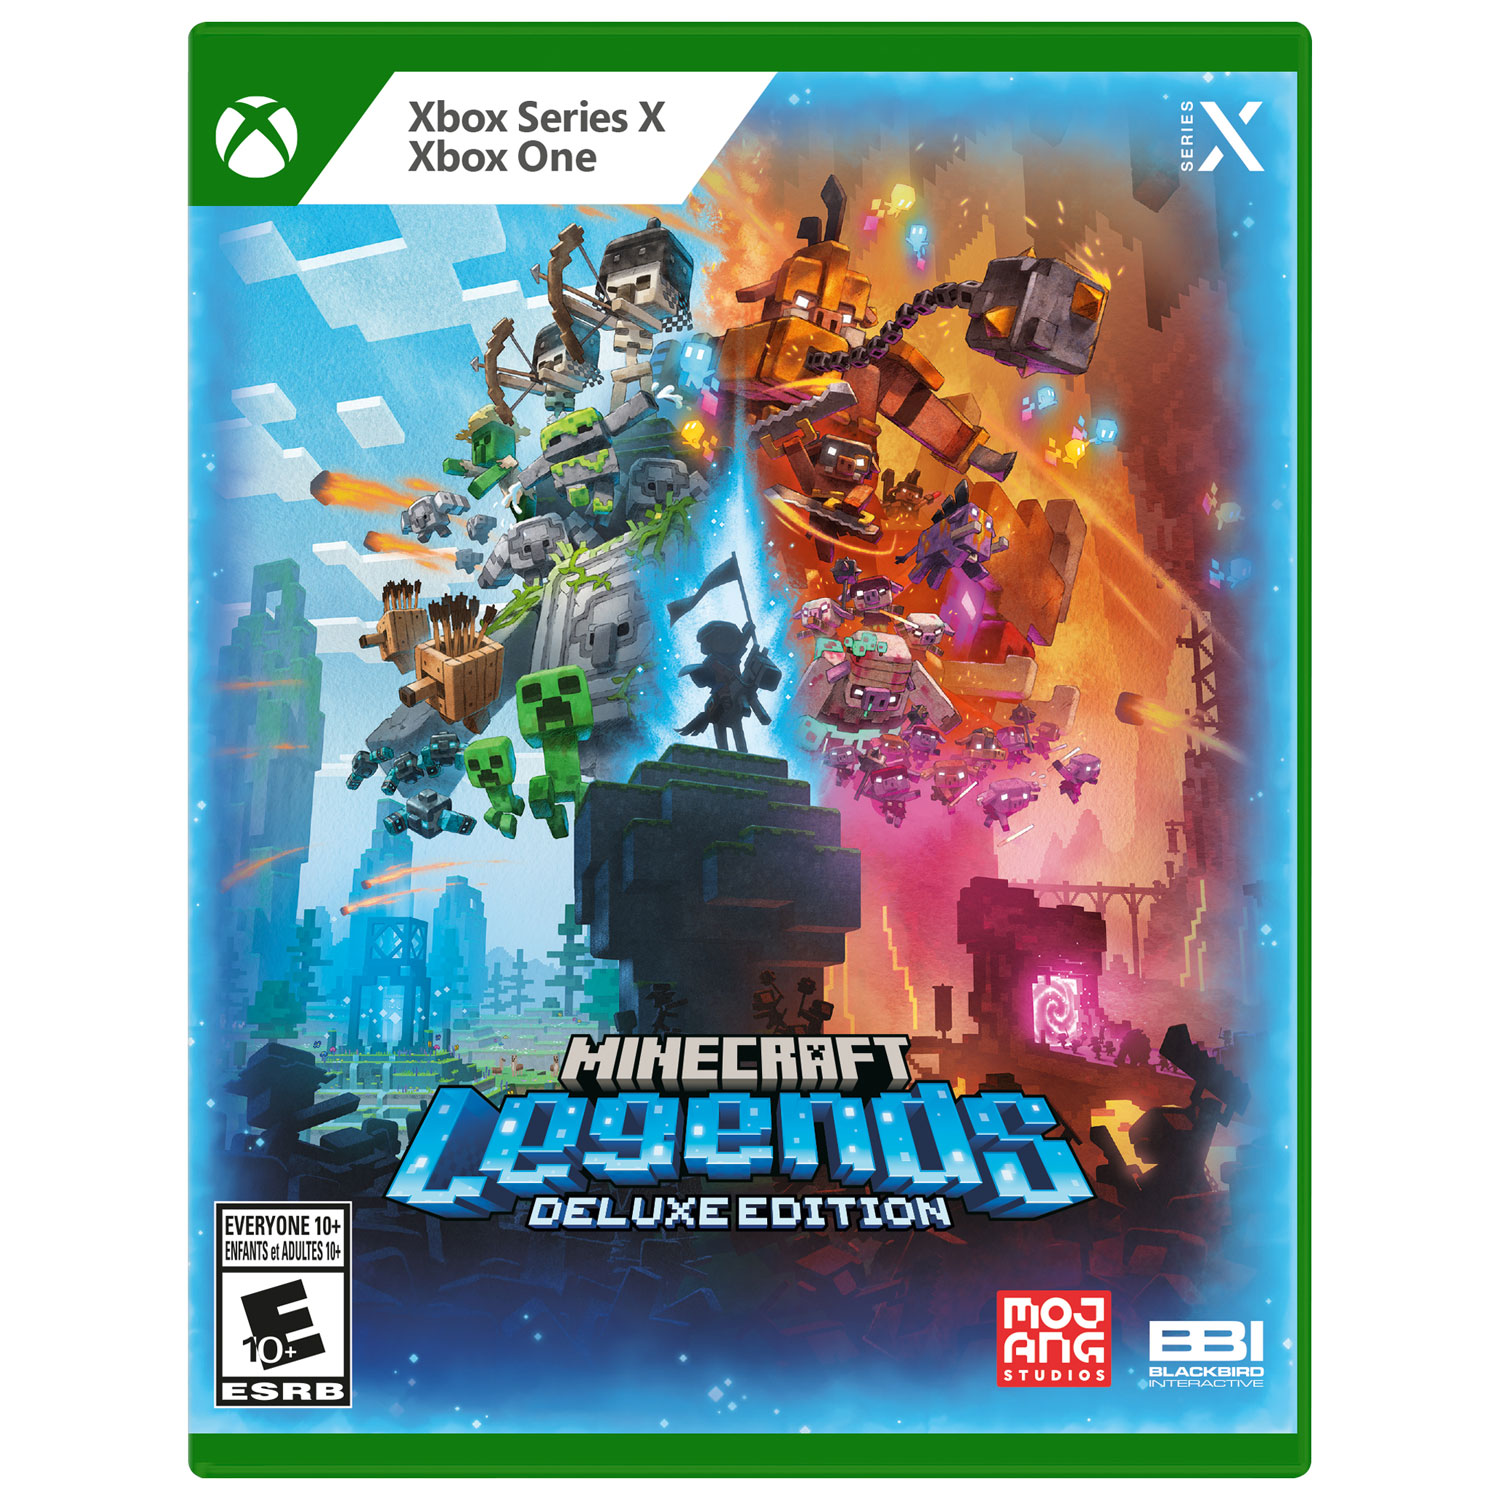 Minecraft Legends Deluxe Edition (Xbox Series X / Xbox One)